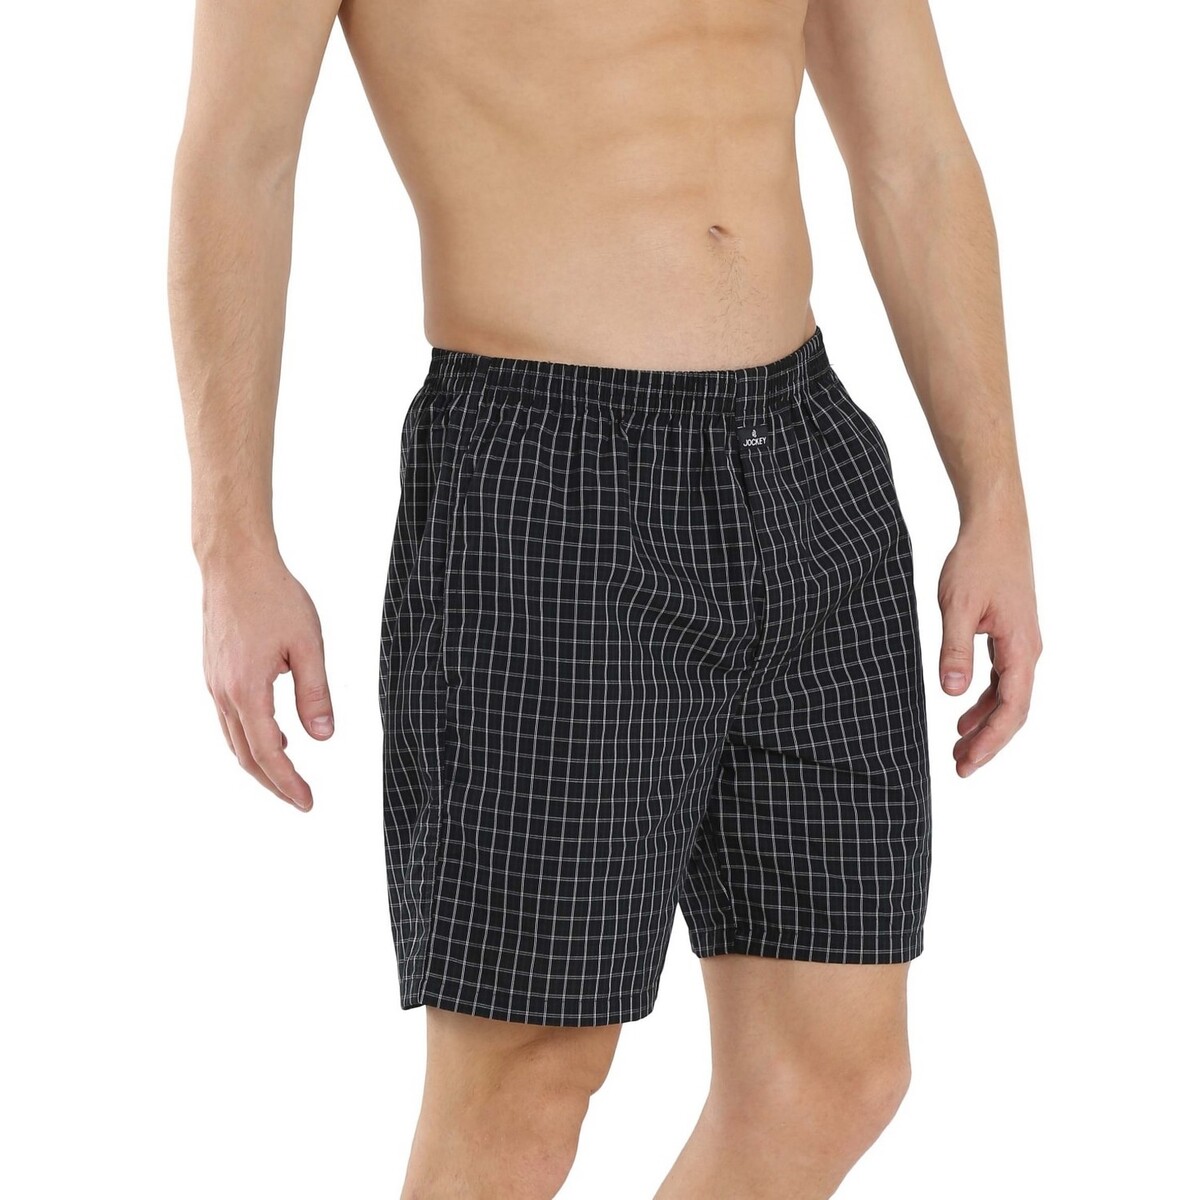 JOCKEY Mens Boxers 1223 2Pc ASSORTED EXTRA LARGE